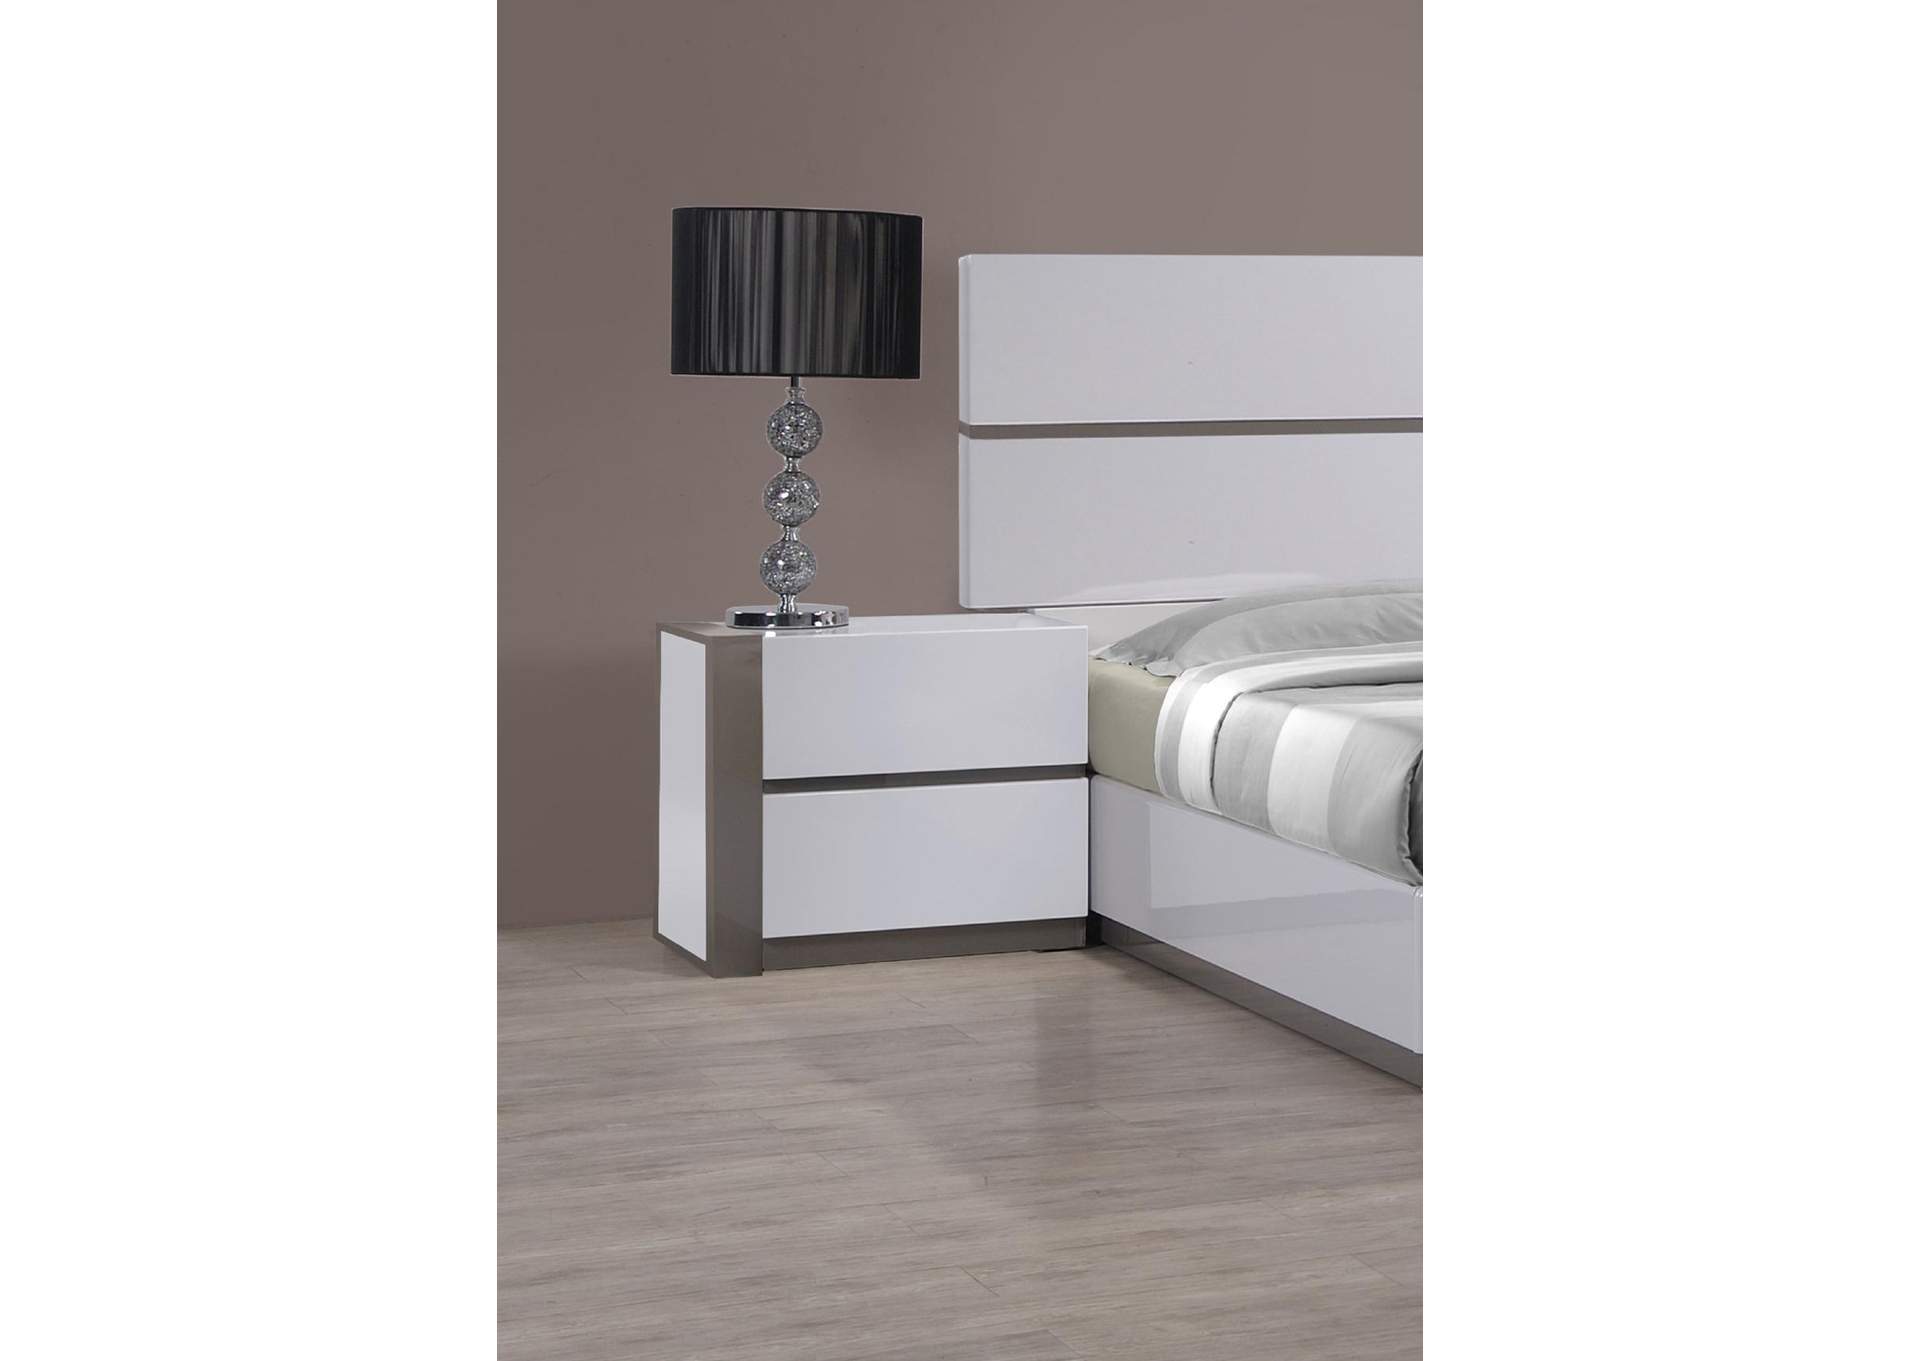 Manila Gloss White & Grey 4 Piece Queen Bedroom Set,Chintaly Imports